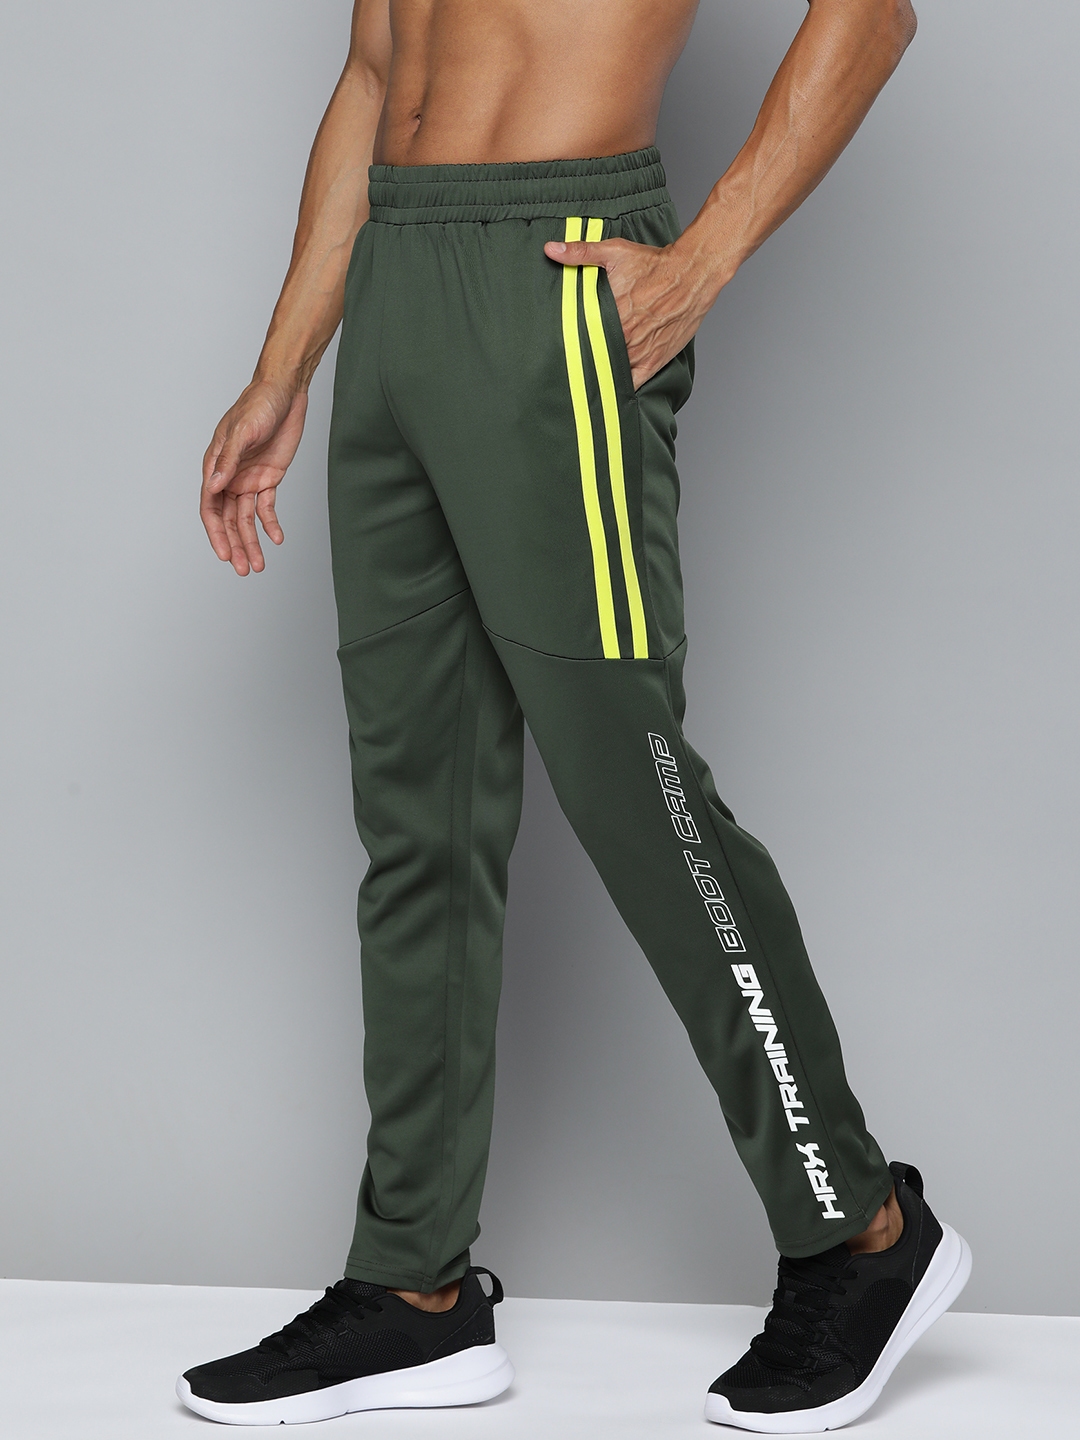 Buy HRX Slim Trousers online - Women - 8 products | FASHIOLA.in